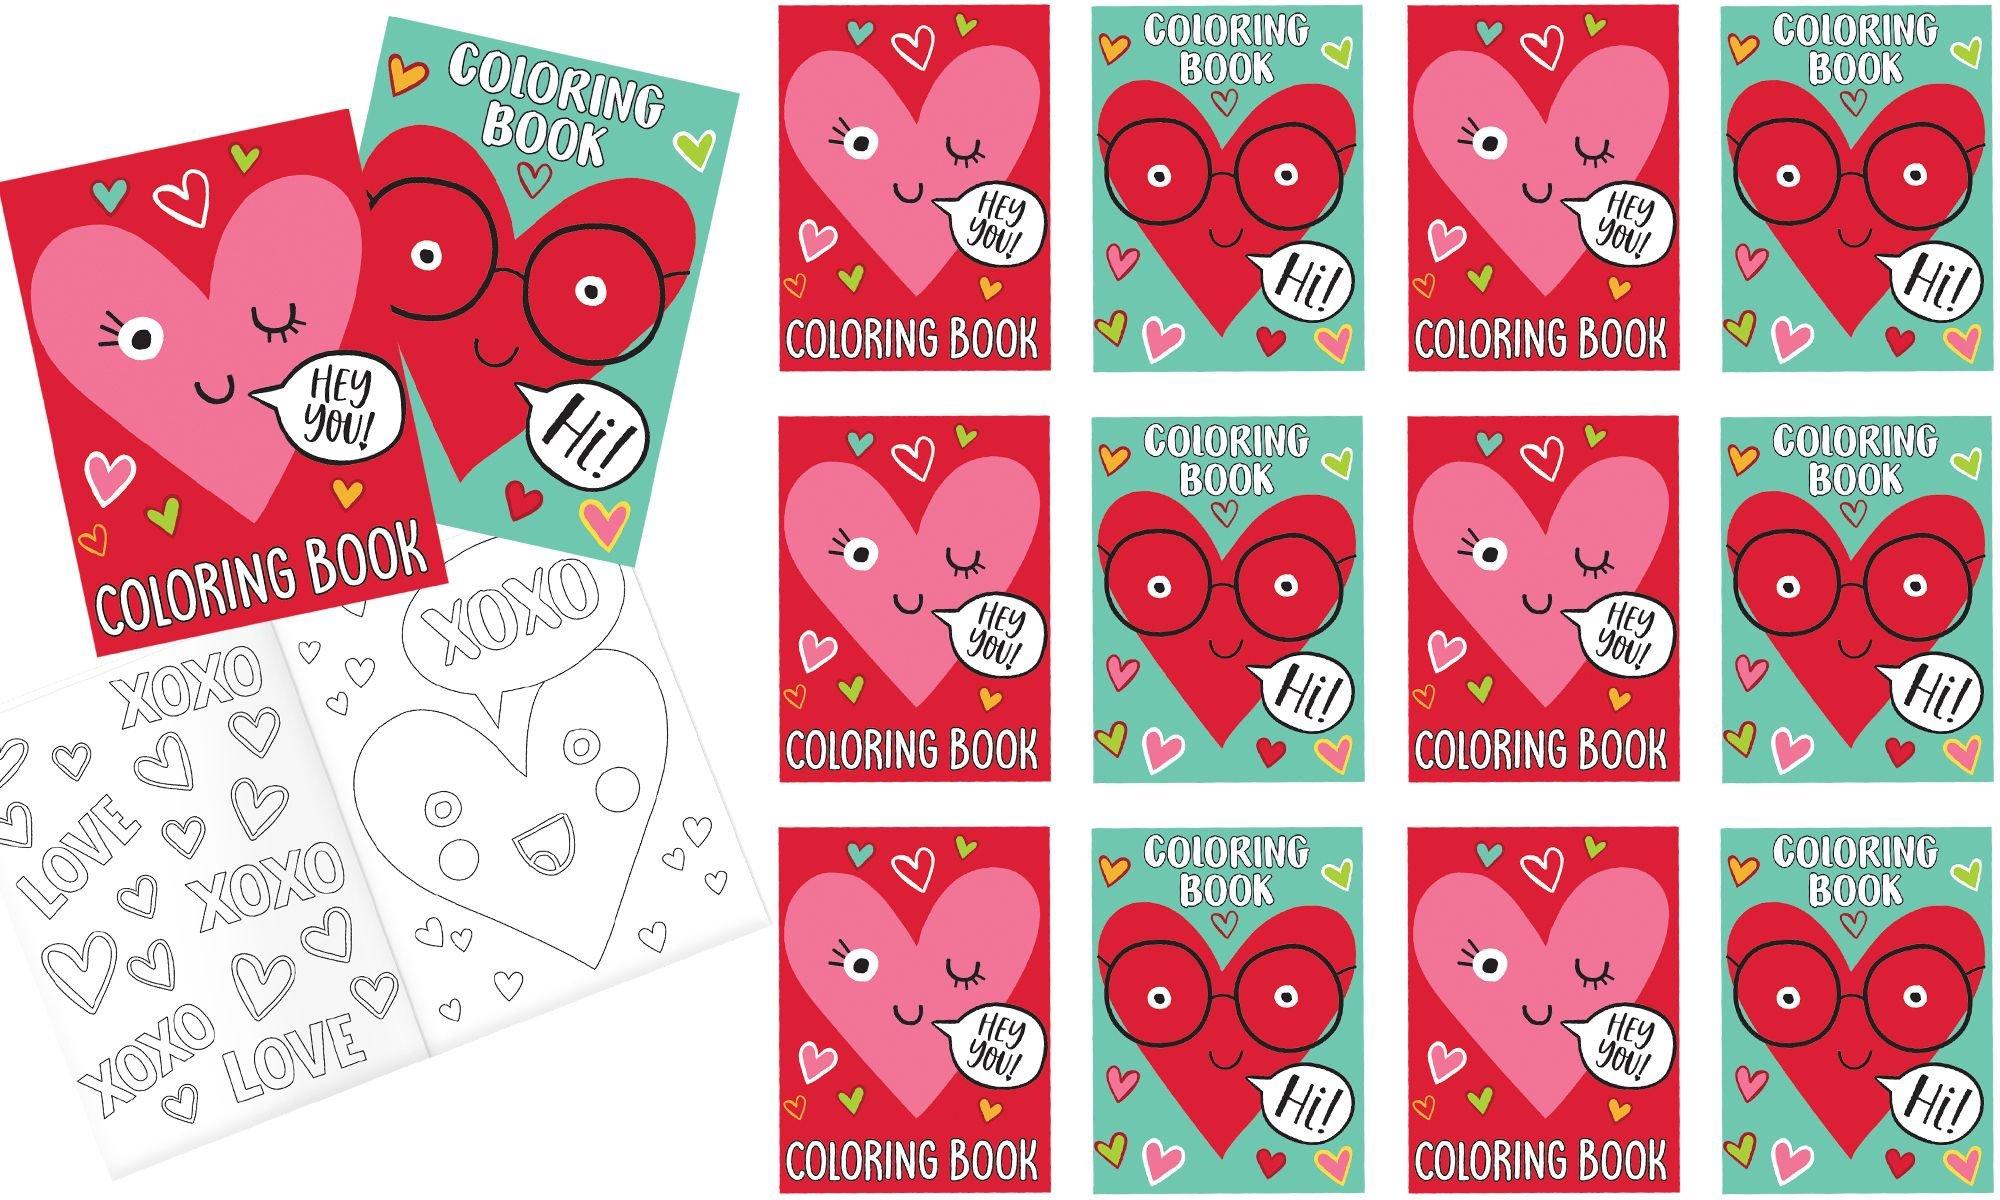  Valentines Day Coloring Books for Kids Bulk, Pack of 20, Small  Color Booklets in 5 Designs, Valentine Party Favors for Kids, Educational Valentine  Gifts for Kids Classroom, Valentine Treats for Kids 